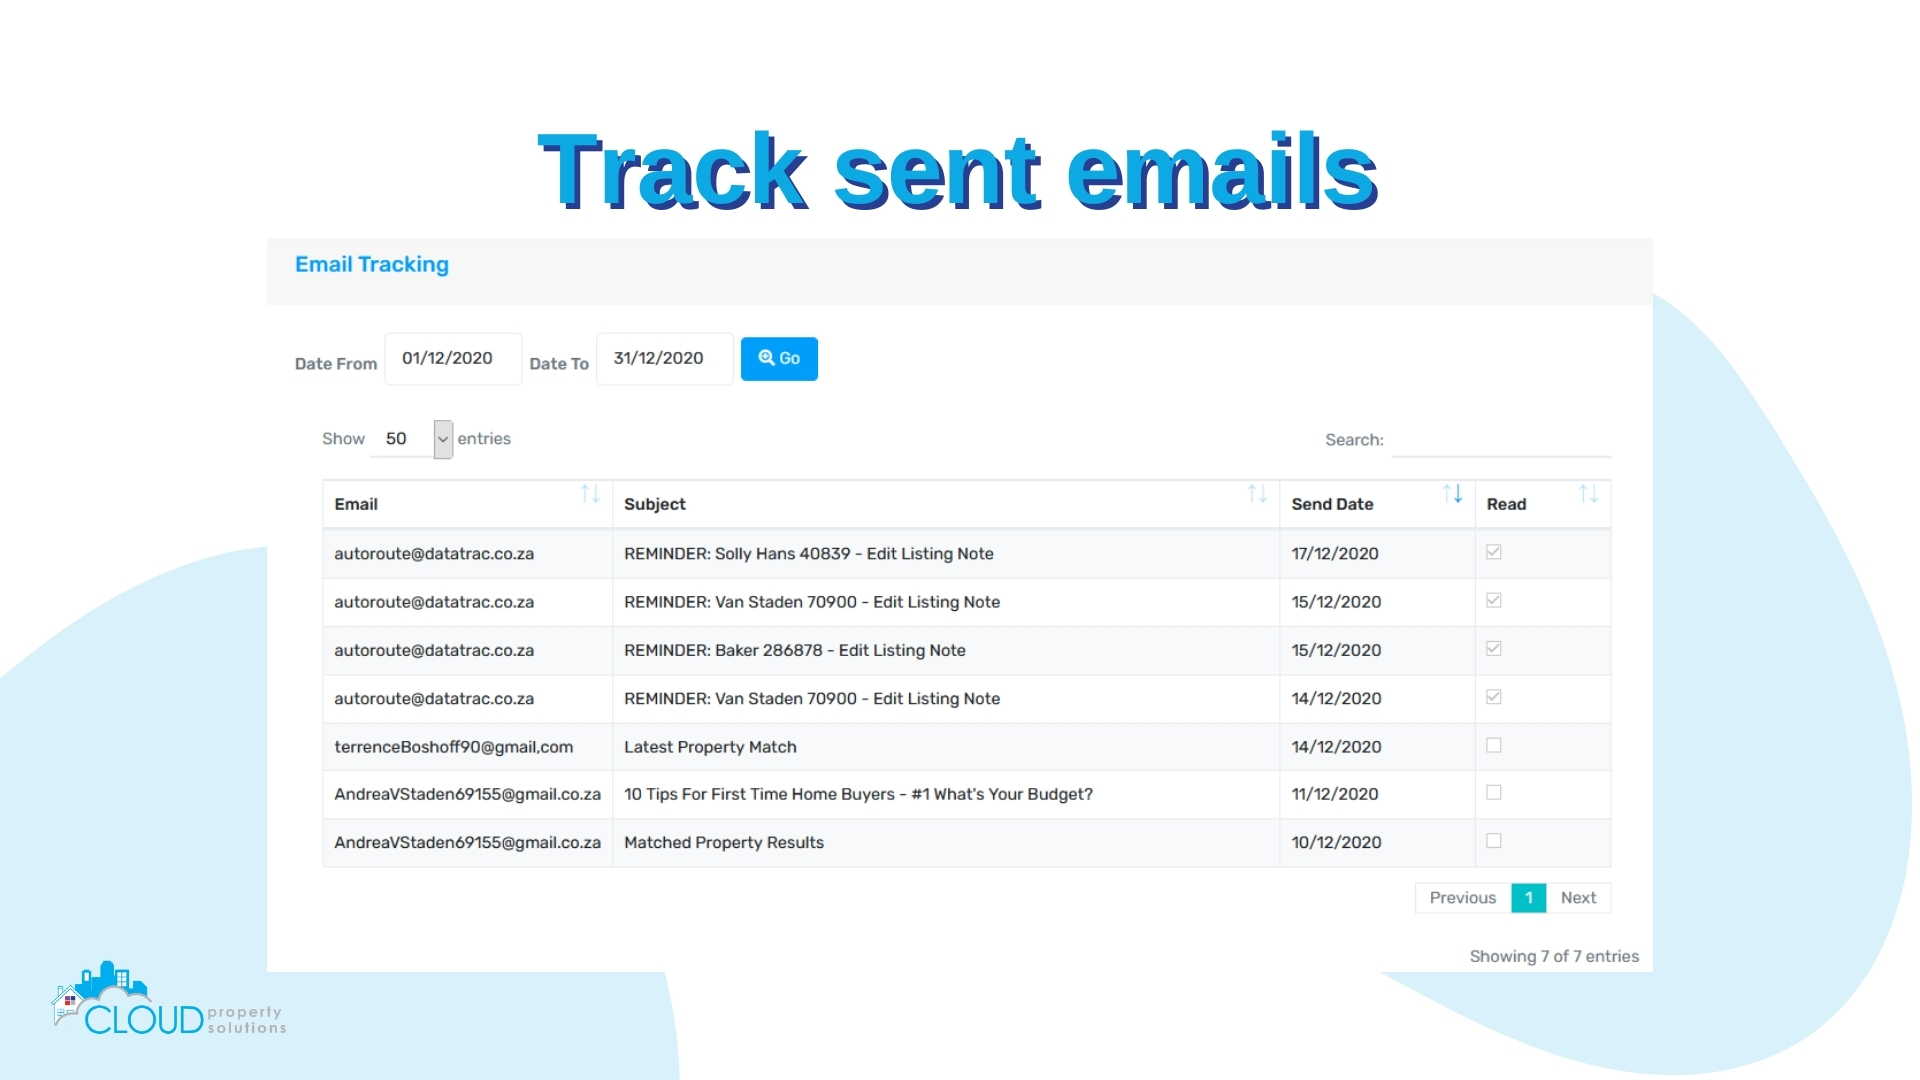 Track sent and read emails